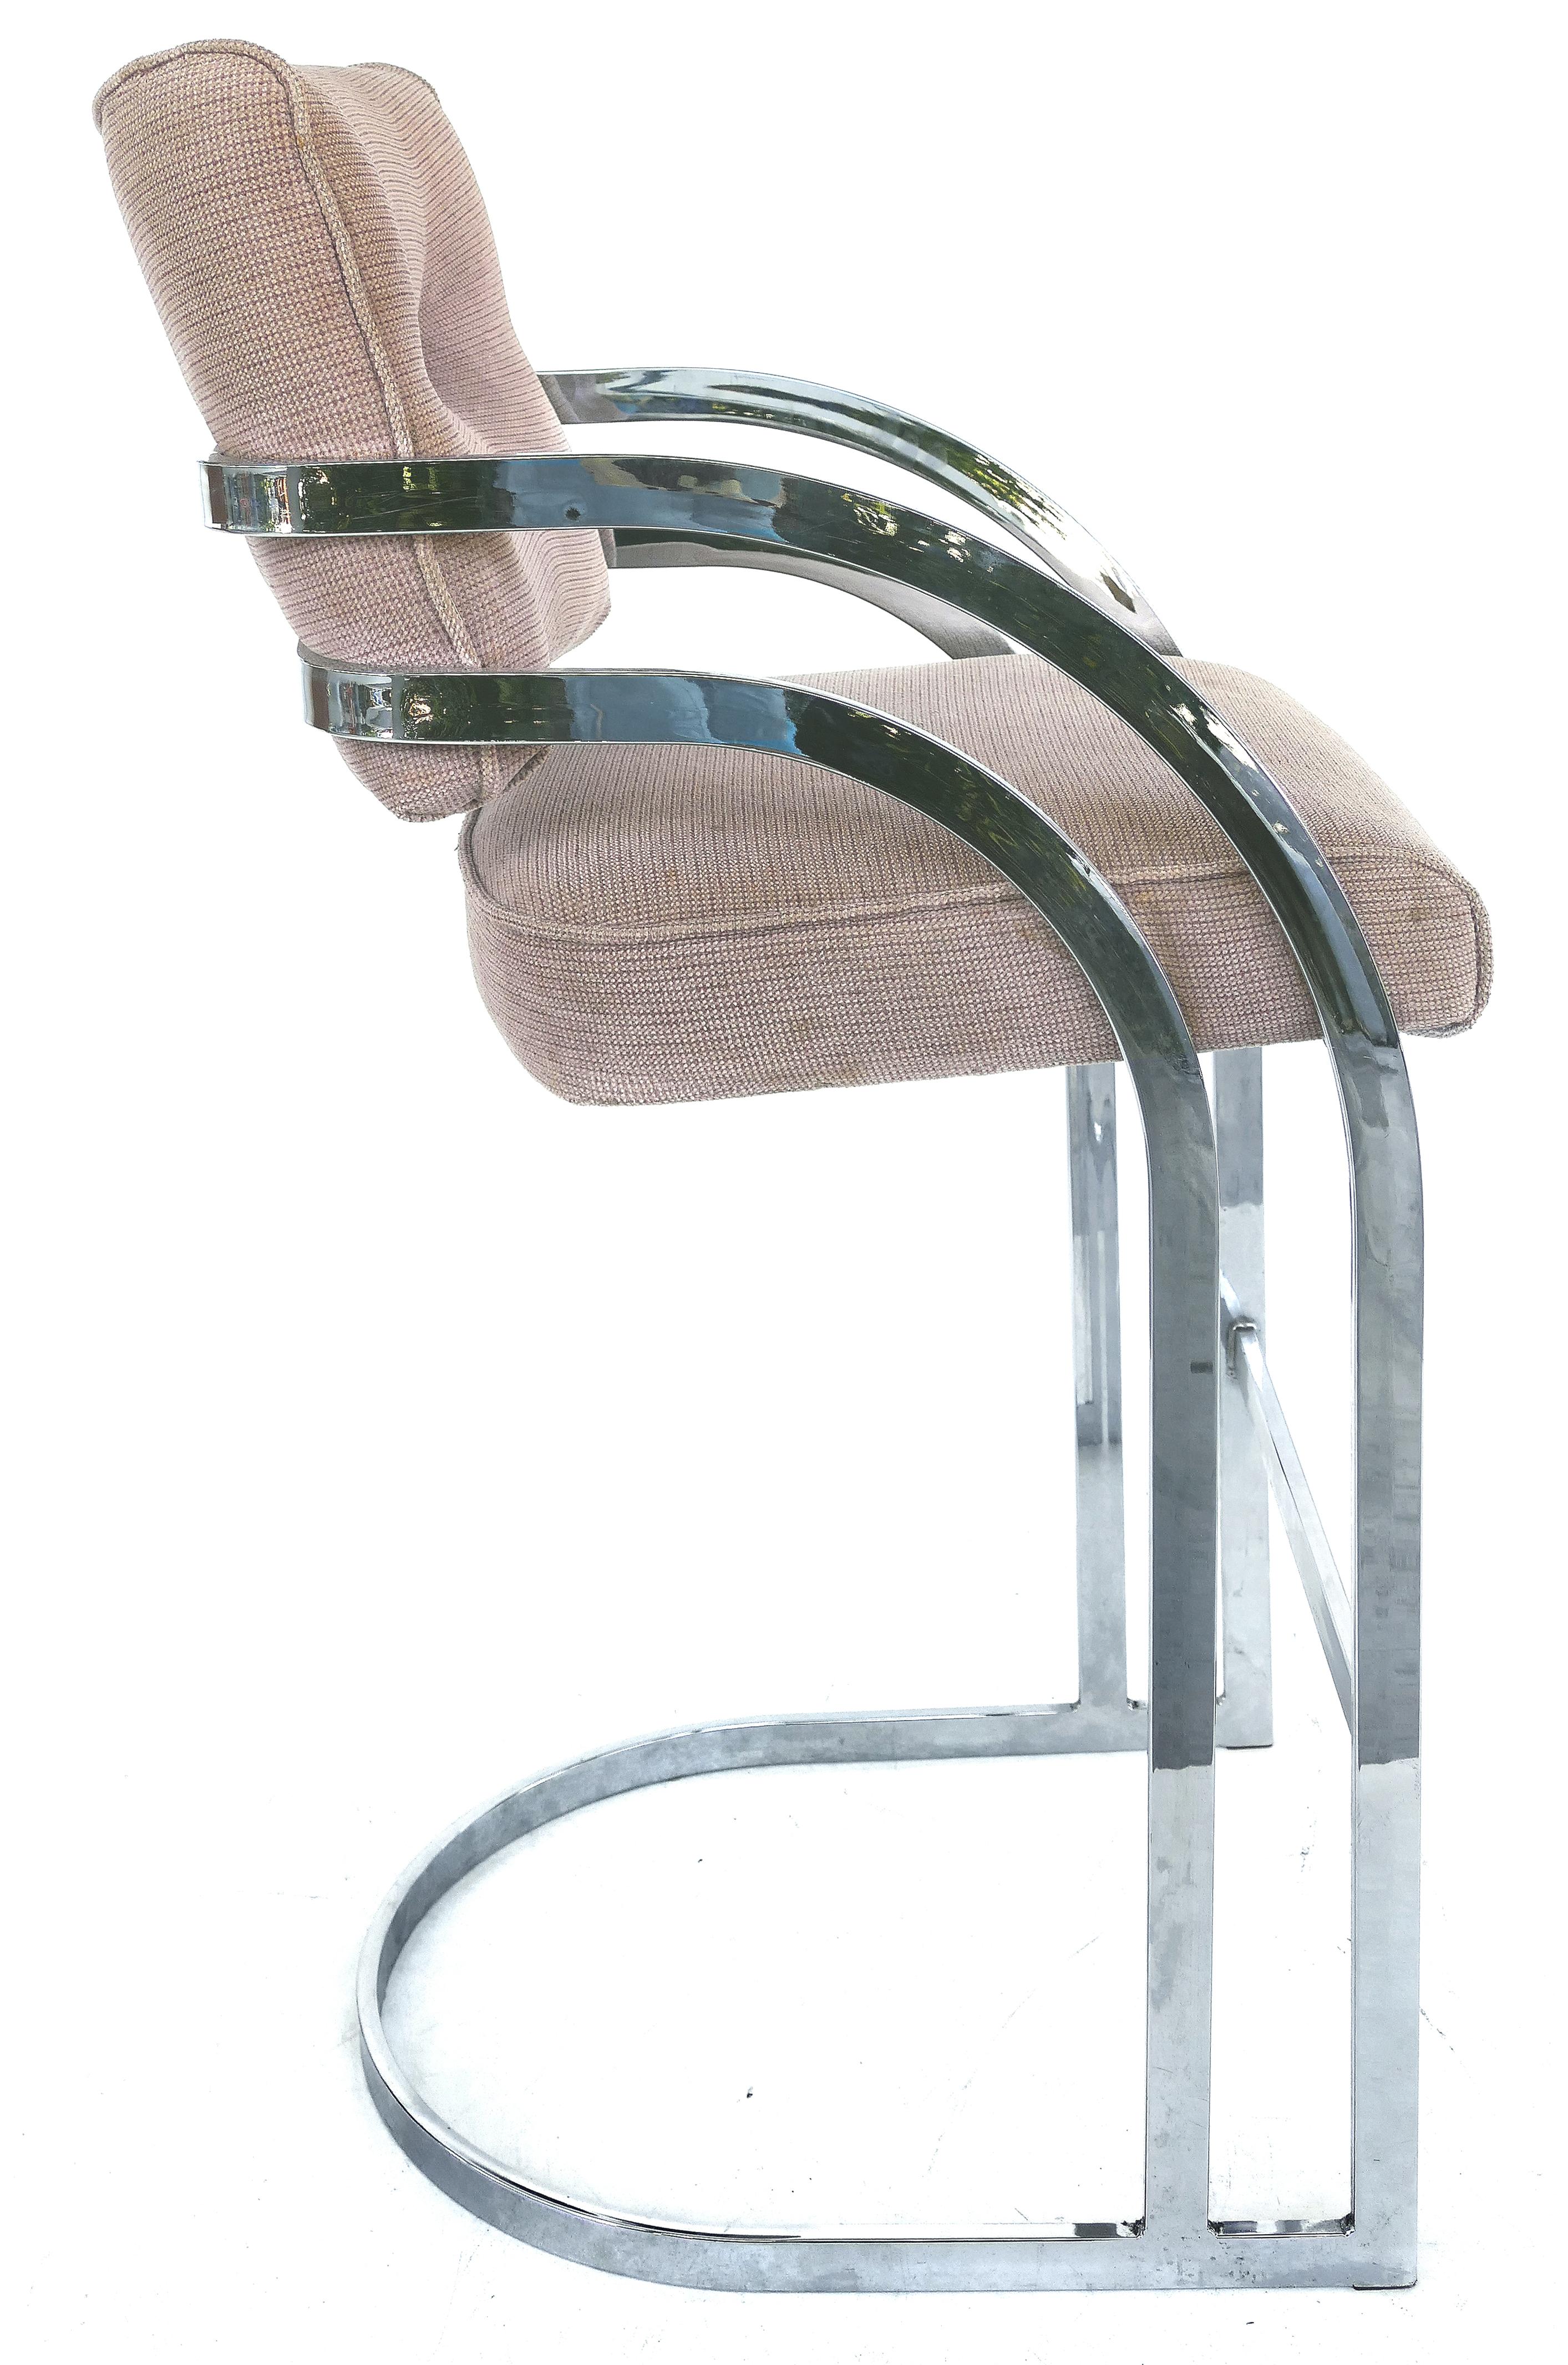 North American Stainless Steel Bar Stools for DIA 'Design Institute America'